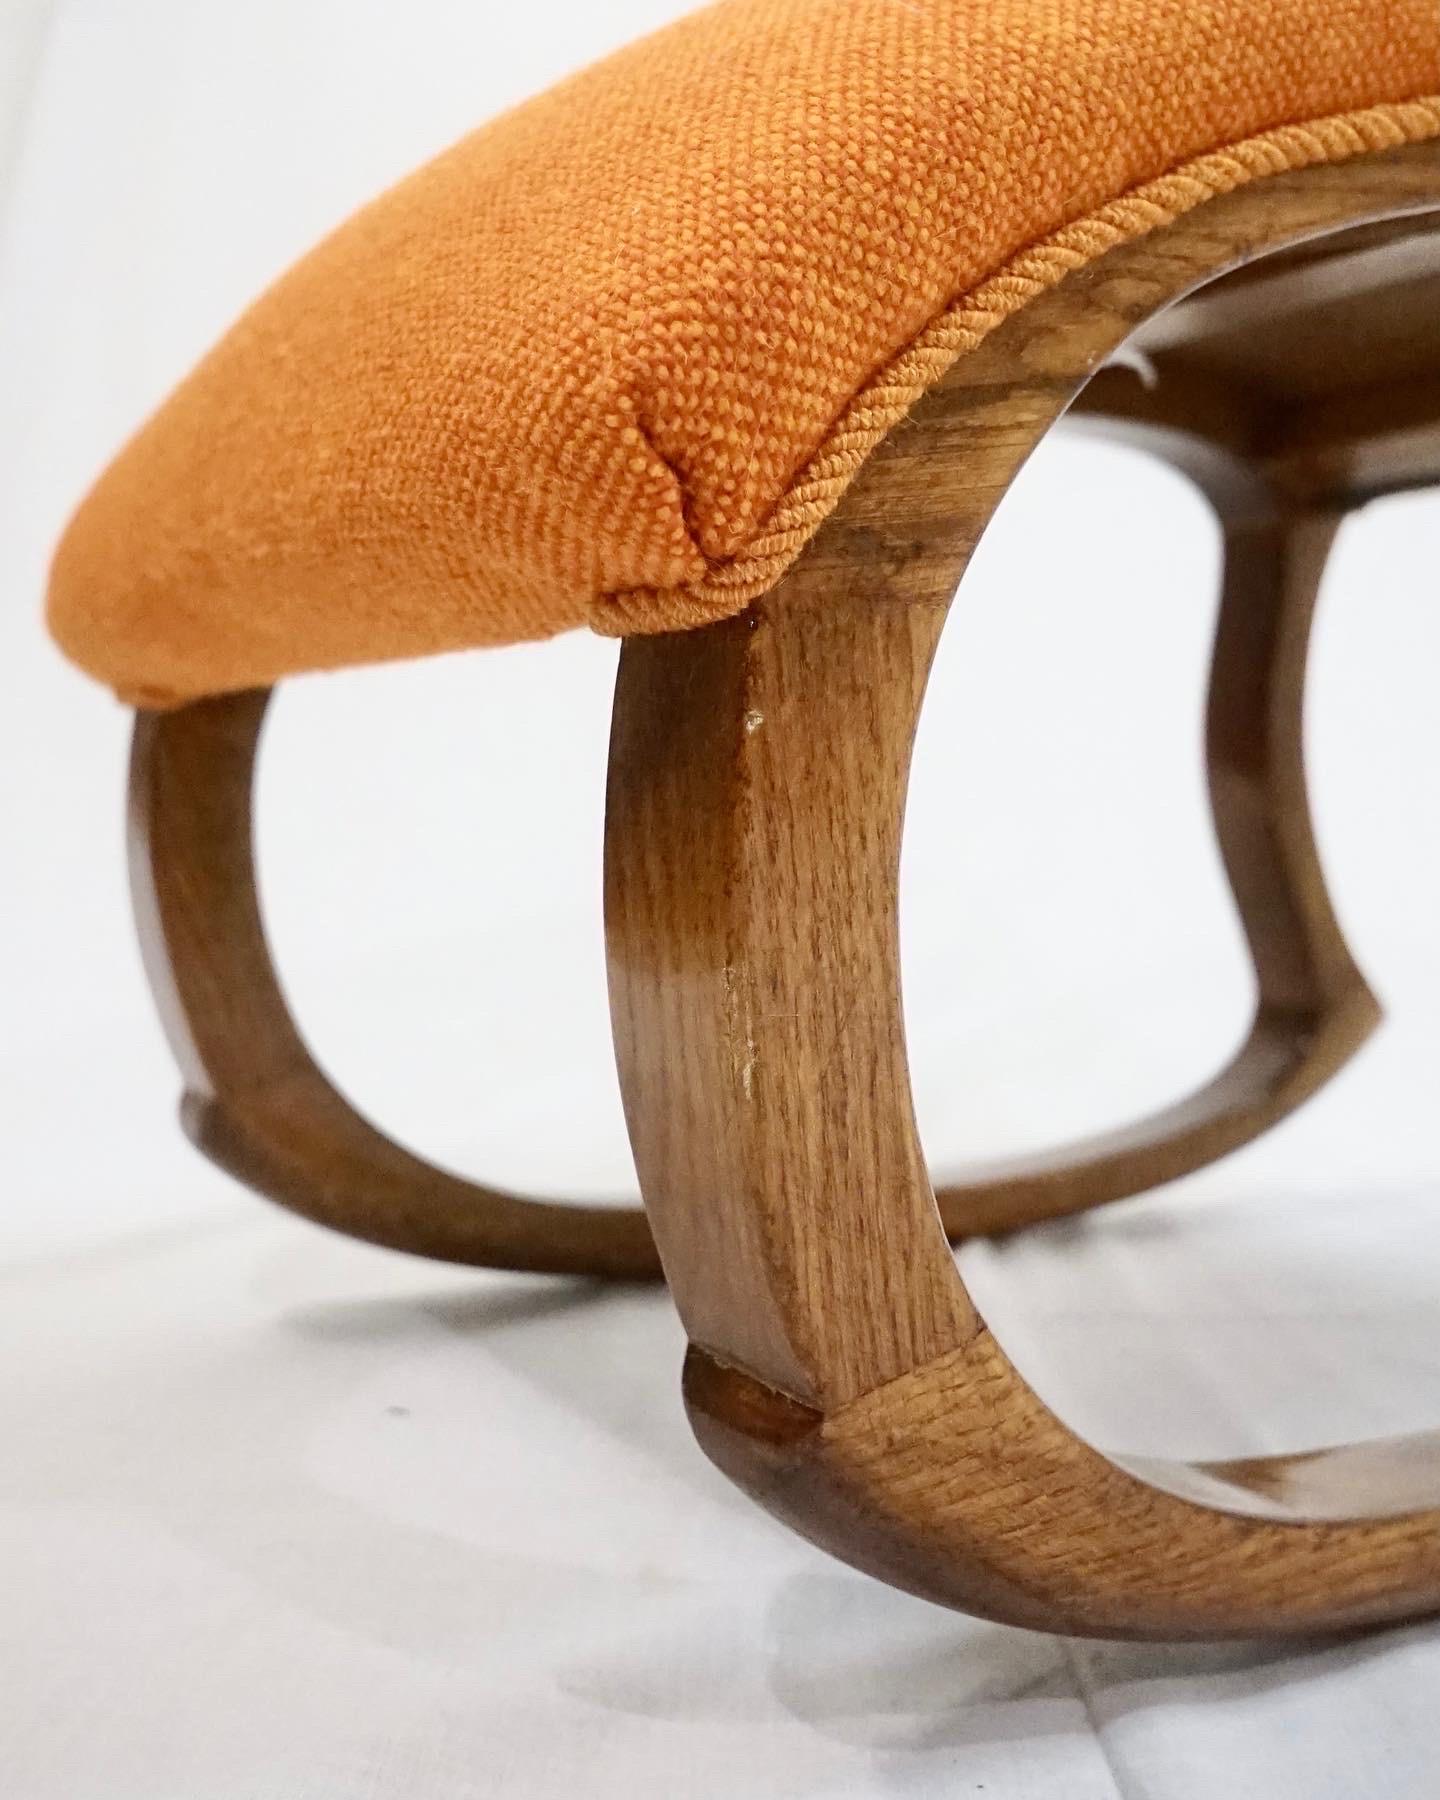 Rocking stool model 16 in dark stained oak and new wool upholstery by Danish designer Alfred Christensen for Slagelse Møbelværk. The stool is in good condition with light signs of use, and with a new upholstery in orange Hallingdal wool done by a